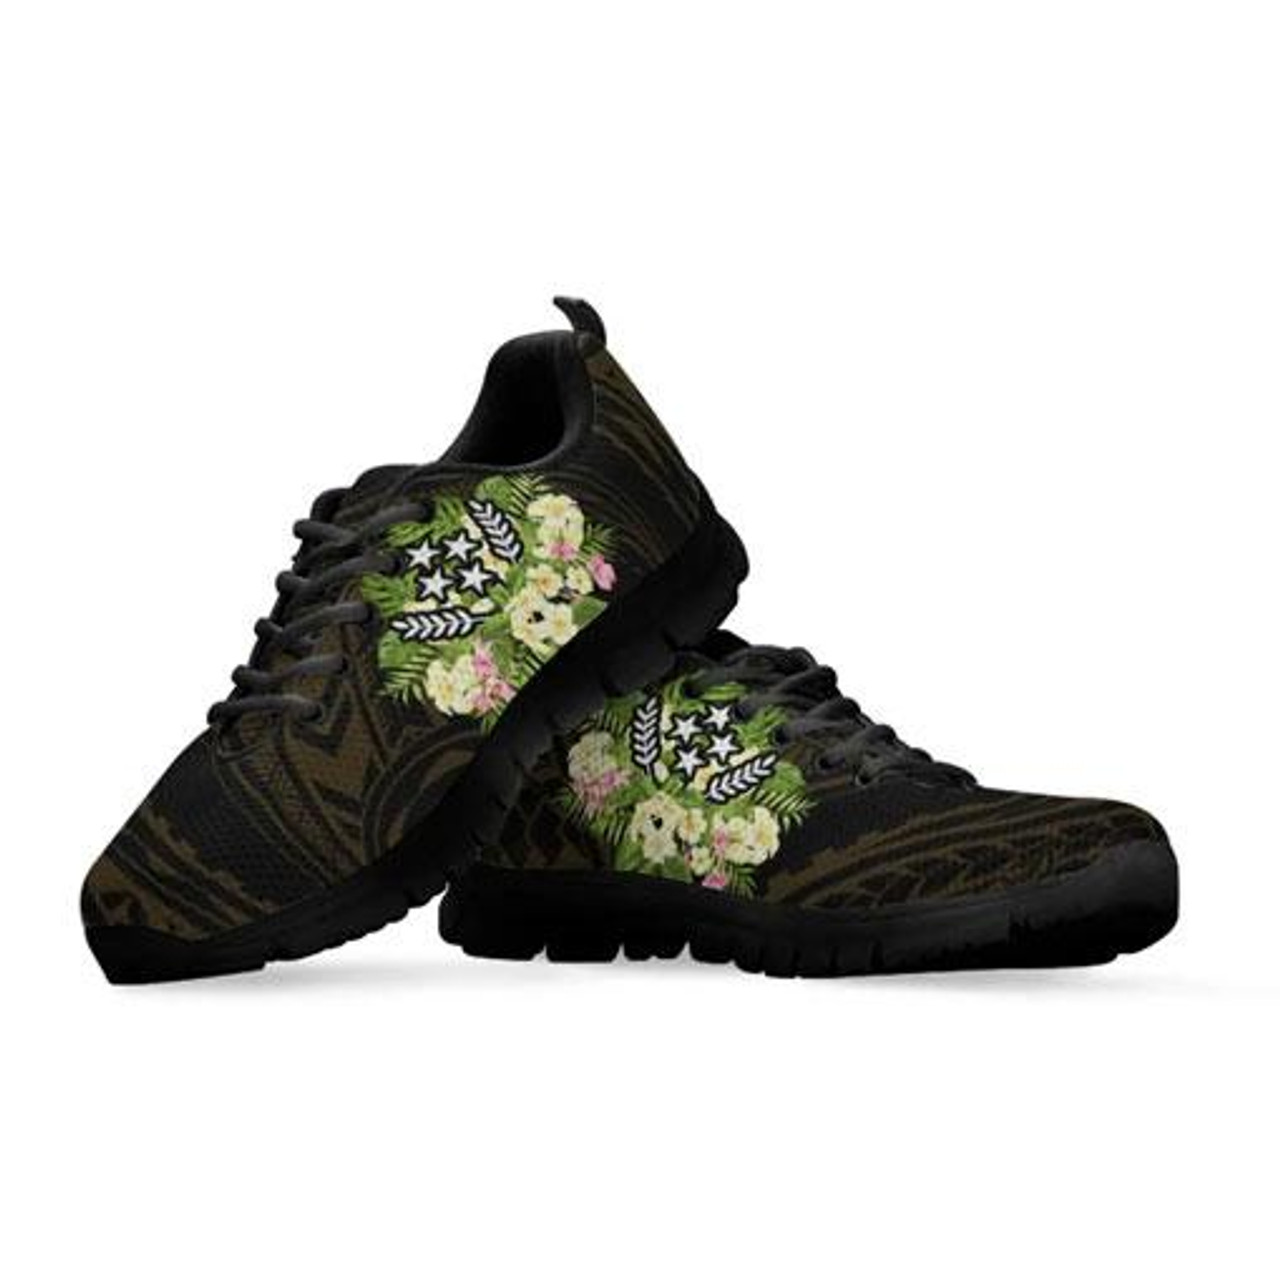 Kosrae State Sneakers - Polynesian Gold Patterns Collection 3